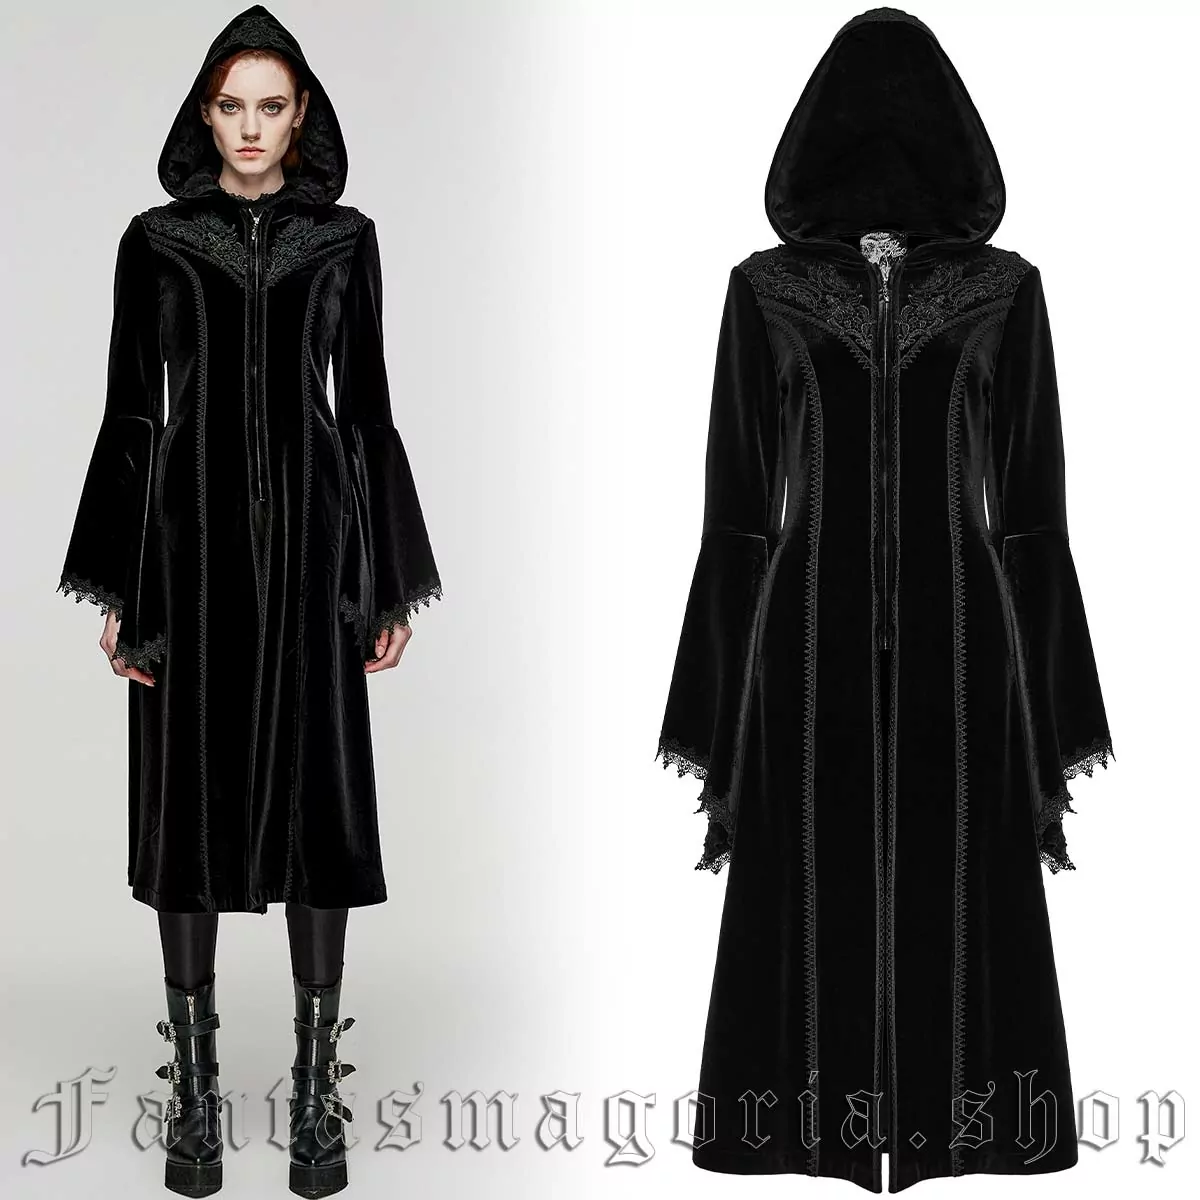 Women's Gothic black velvet fit and flare long hooded flared sleeve zip-up coat. - Punk Rave - DY-1510/BK